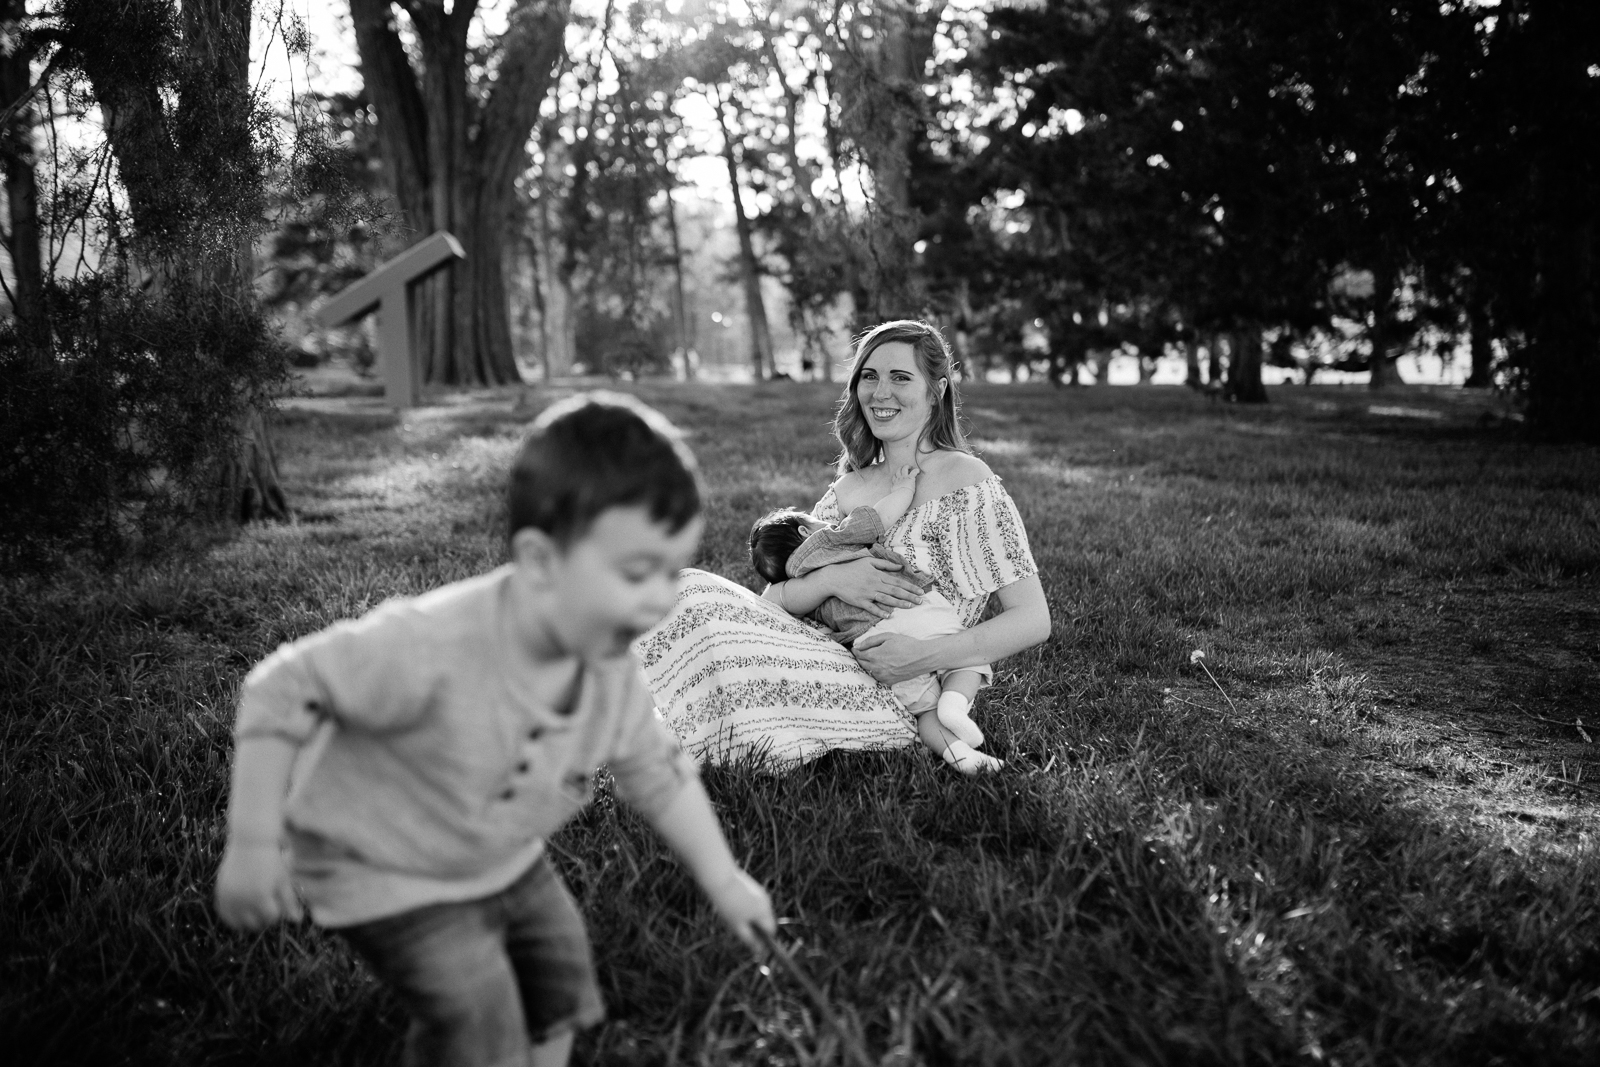  Black and white portrait of mother breastfeeding her baby while her toddler plays nearby, Kansas City breastfeeding session, lifestyle family photographer, Rebecca Clair Photography 